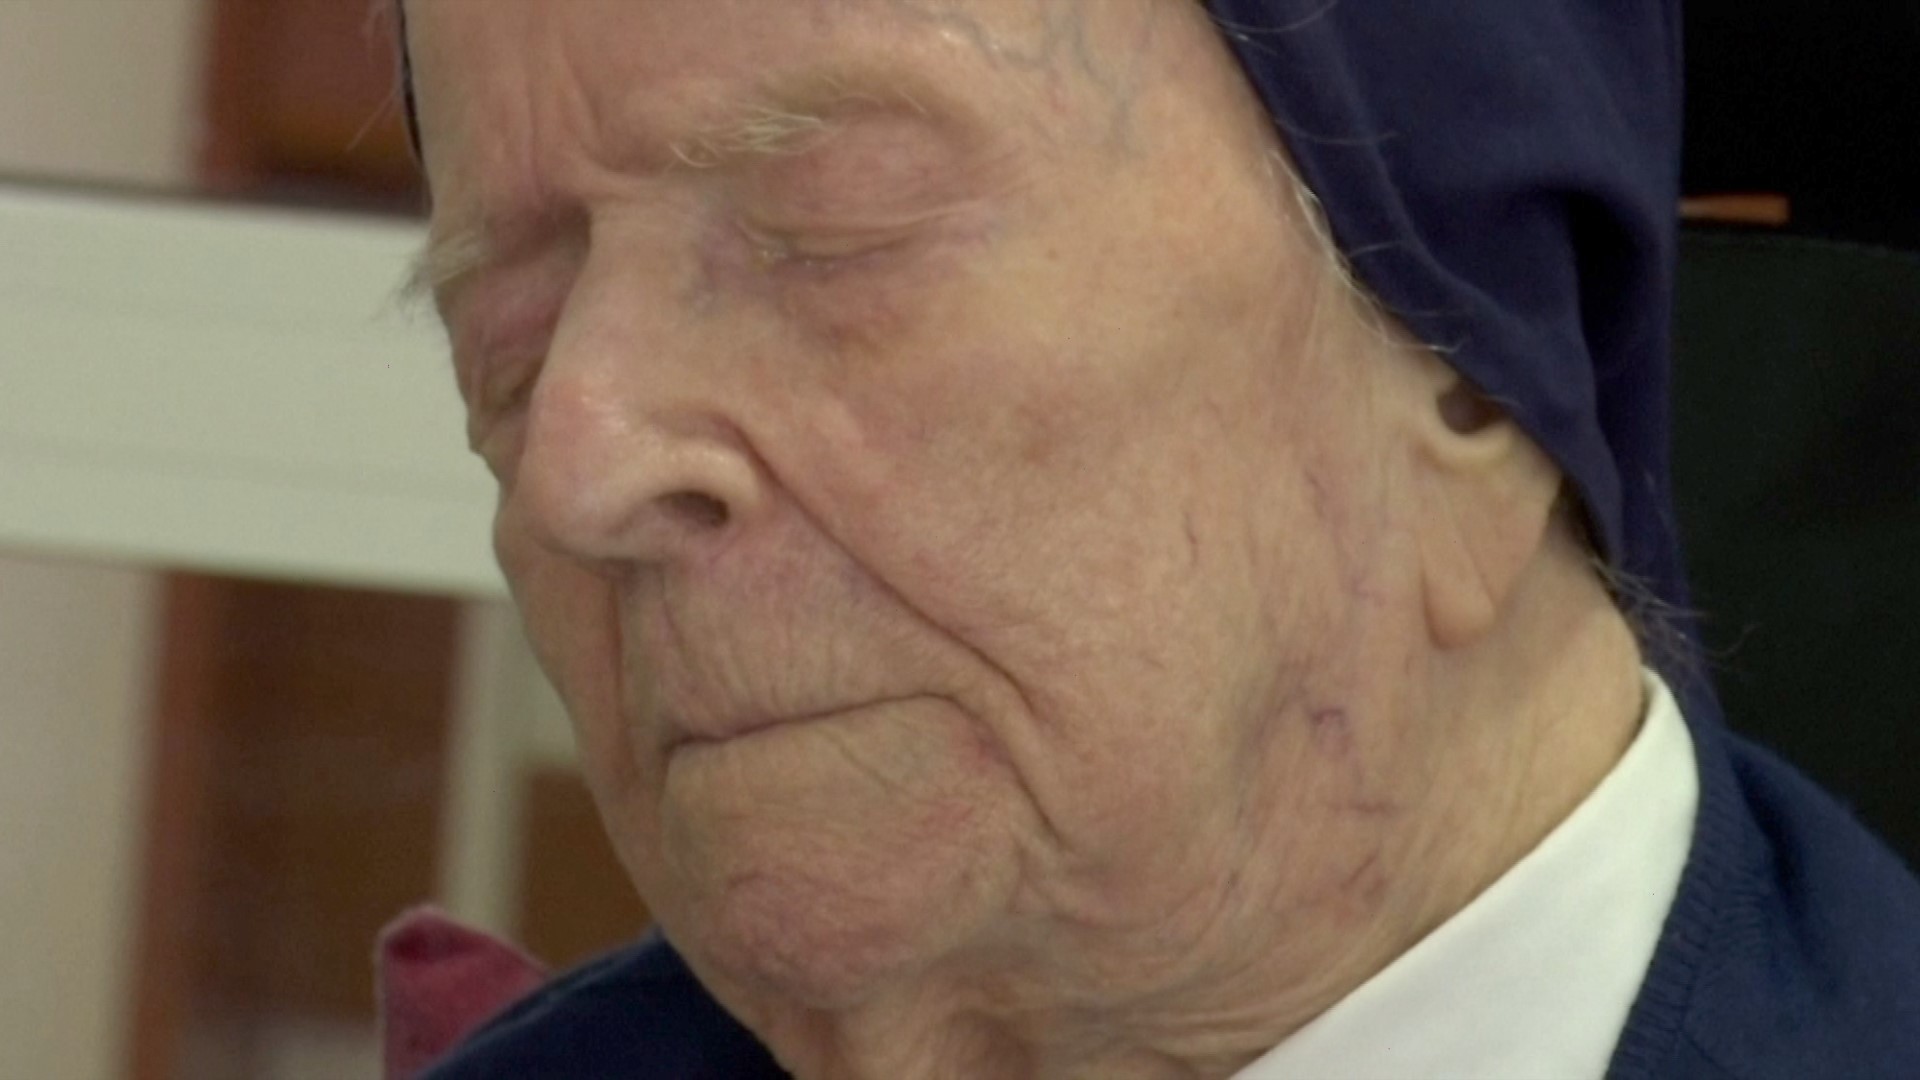 Europe's oldest person, French nun Sister Andre, survived Covid-19 and is celebrating her 117th birthday this week. Buzz60's Johana Restrepo has more.